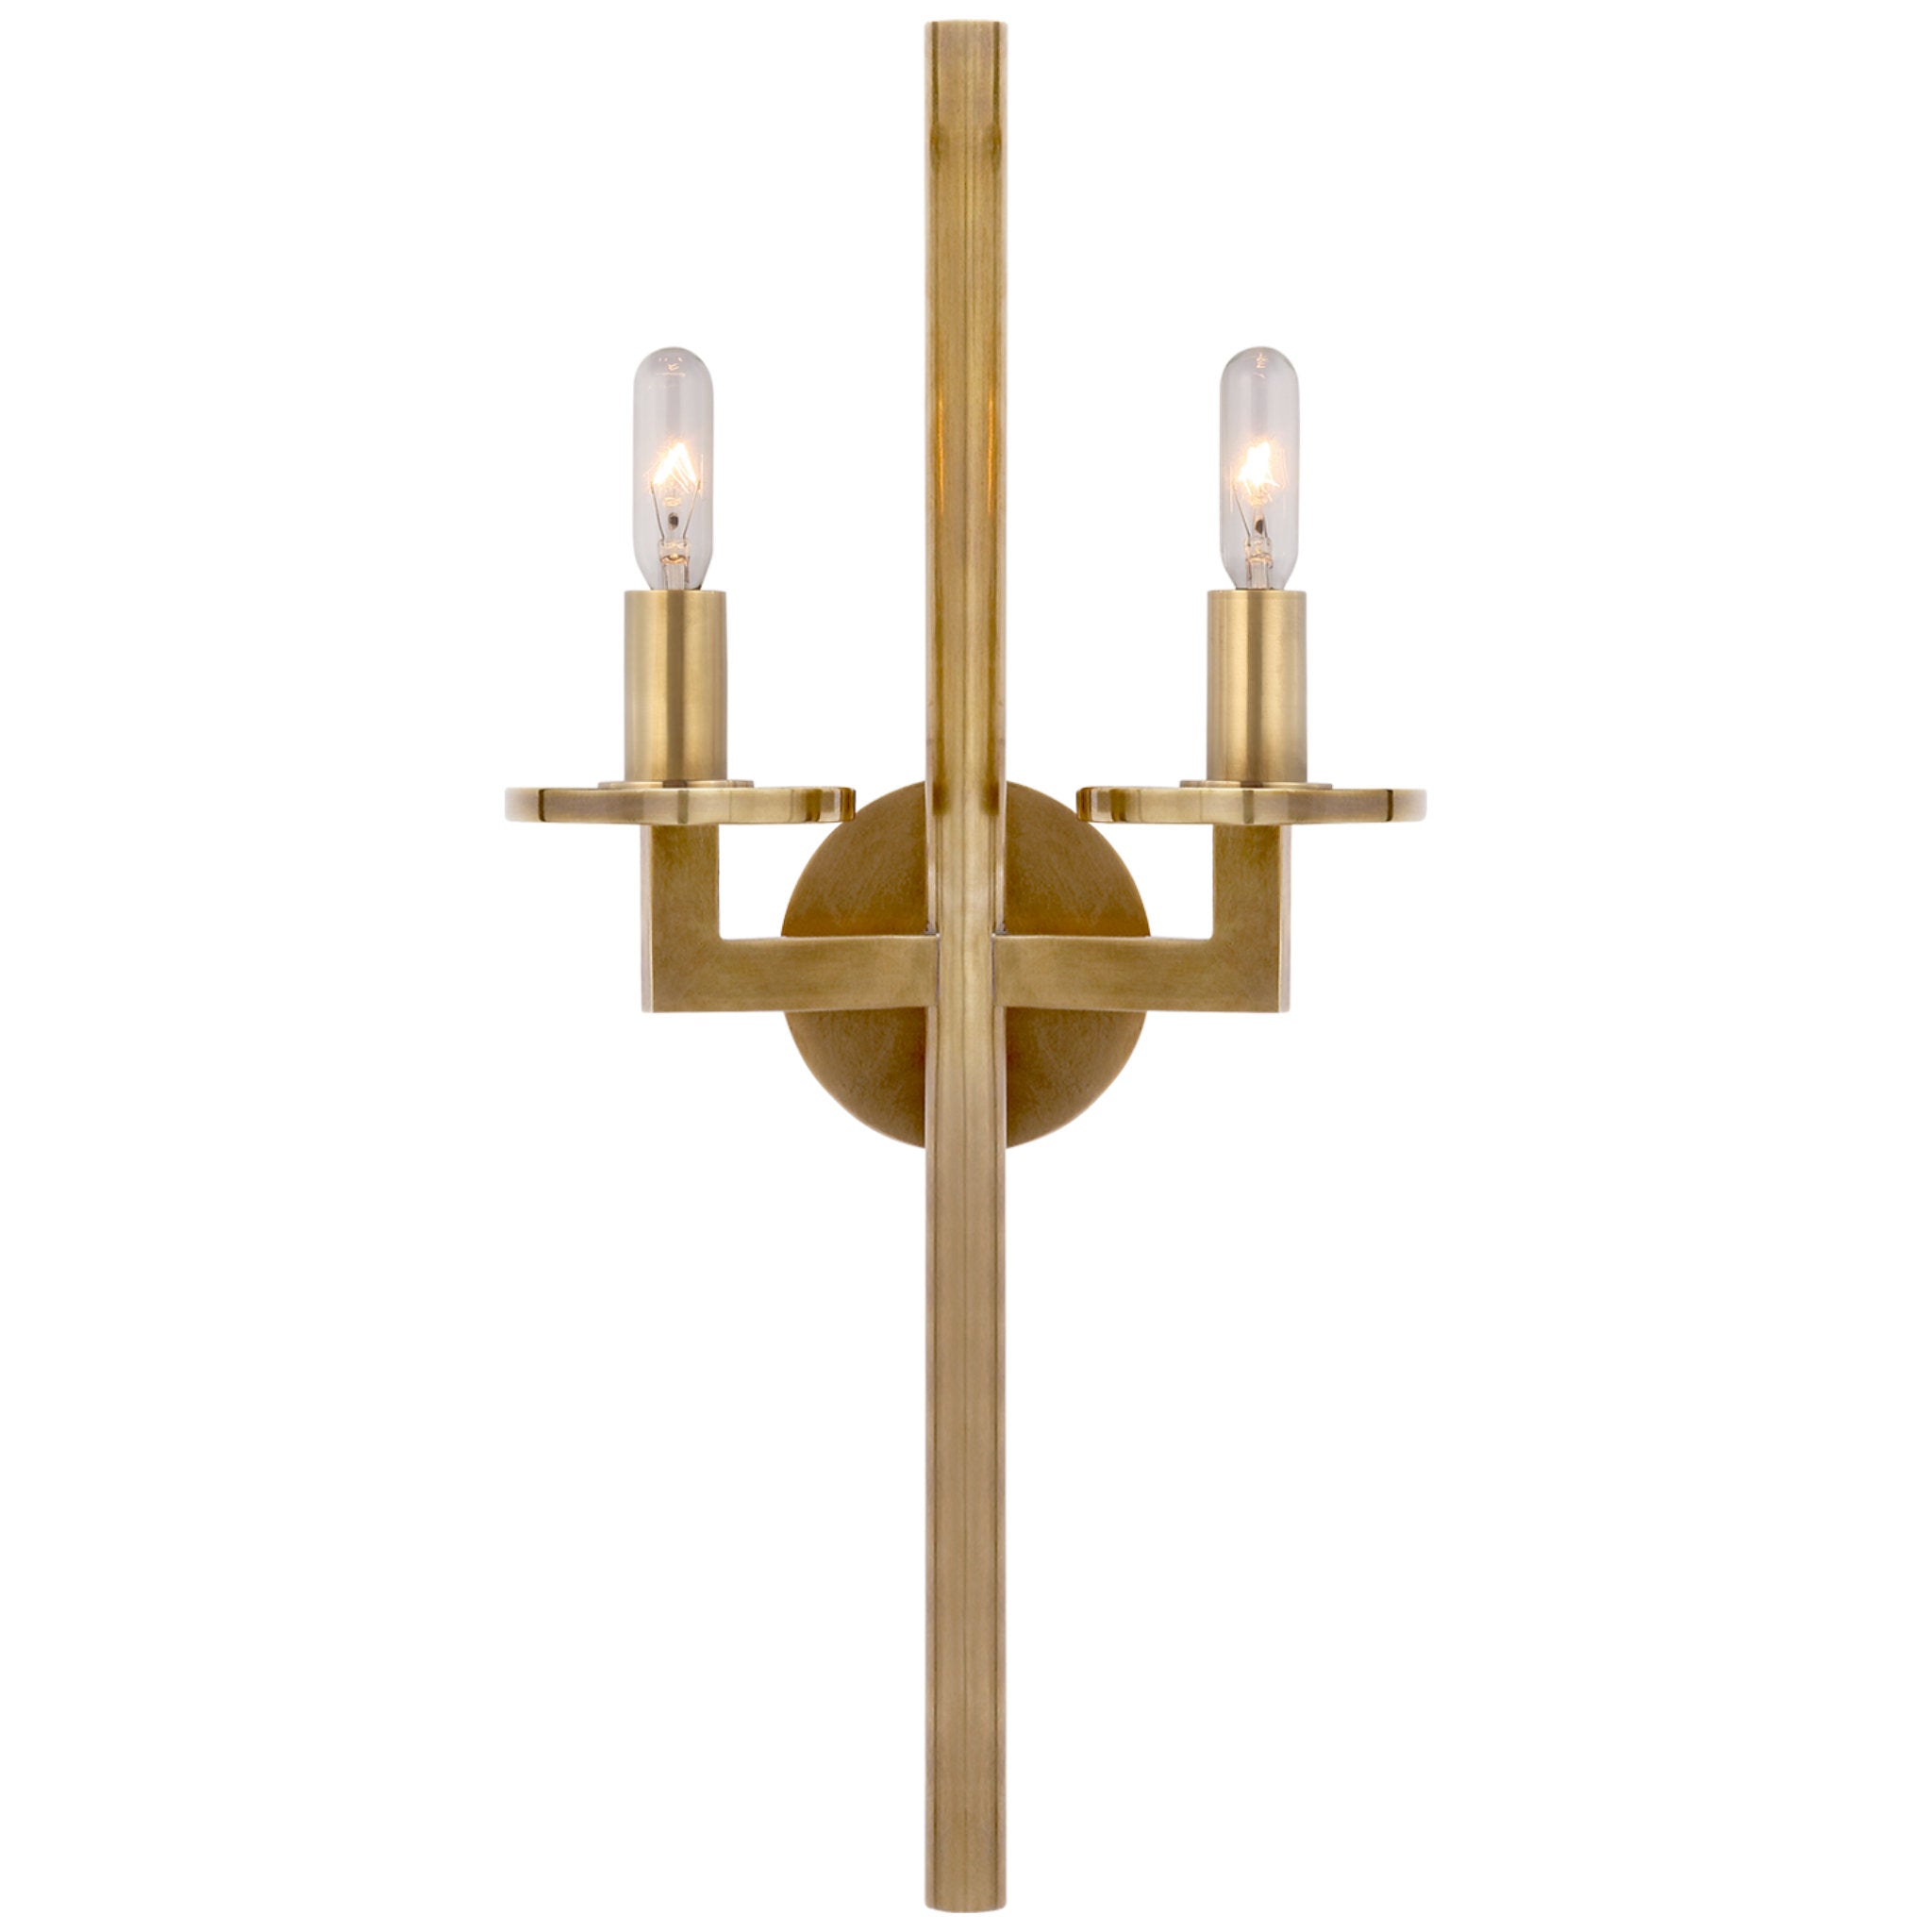 Kelly Wearstler Liaison Double Sconce in Antique-Burnished Brass